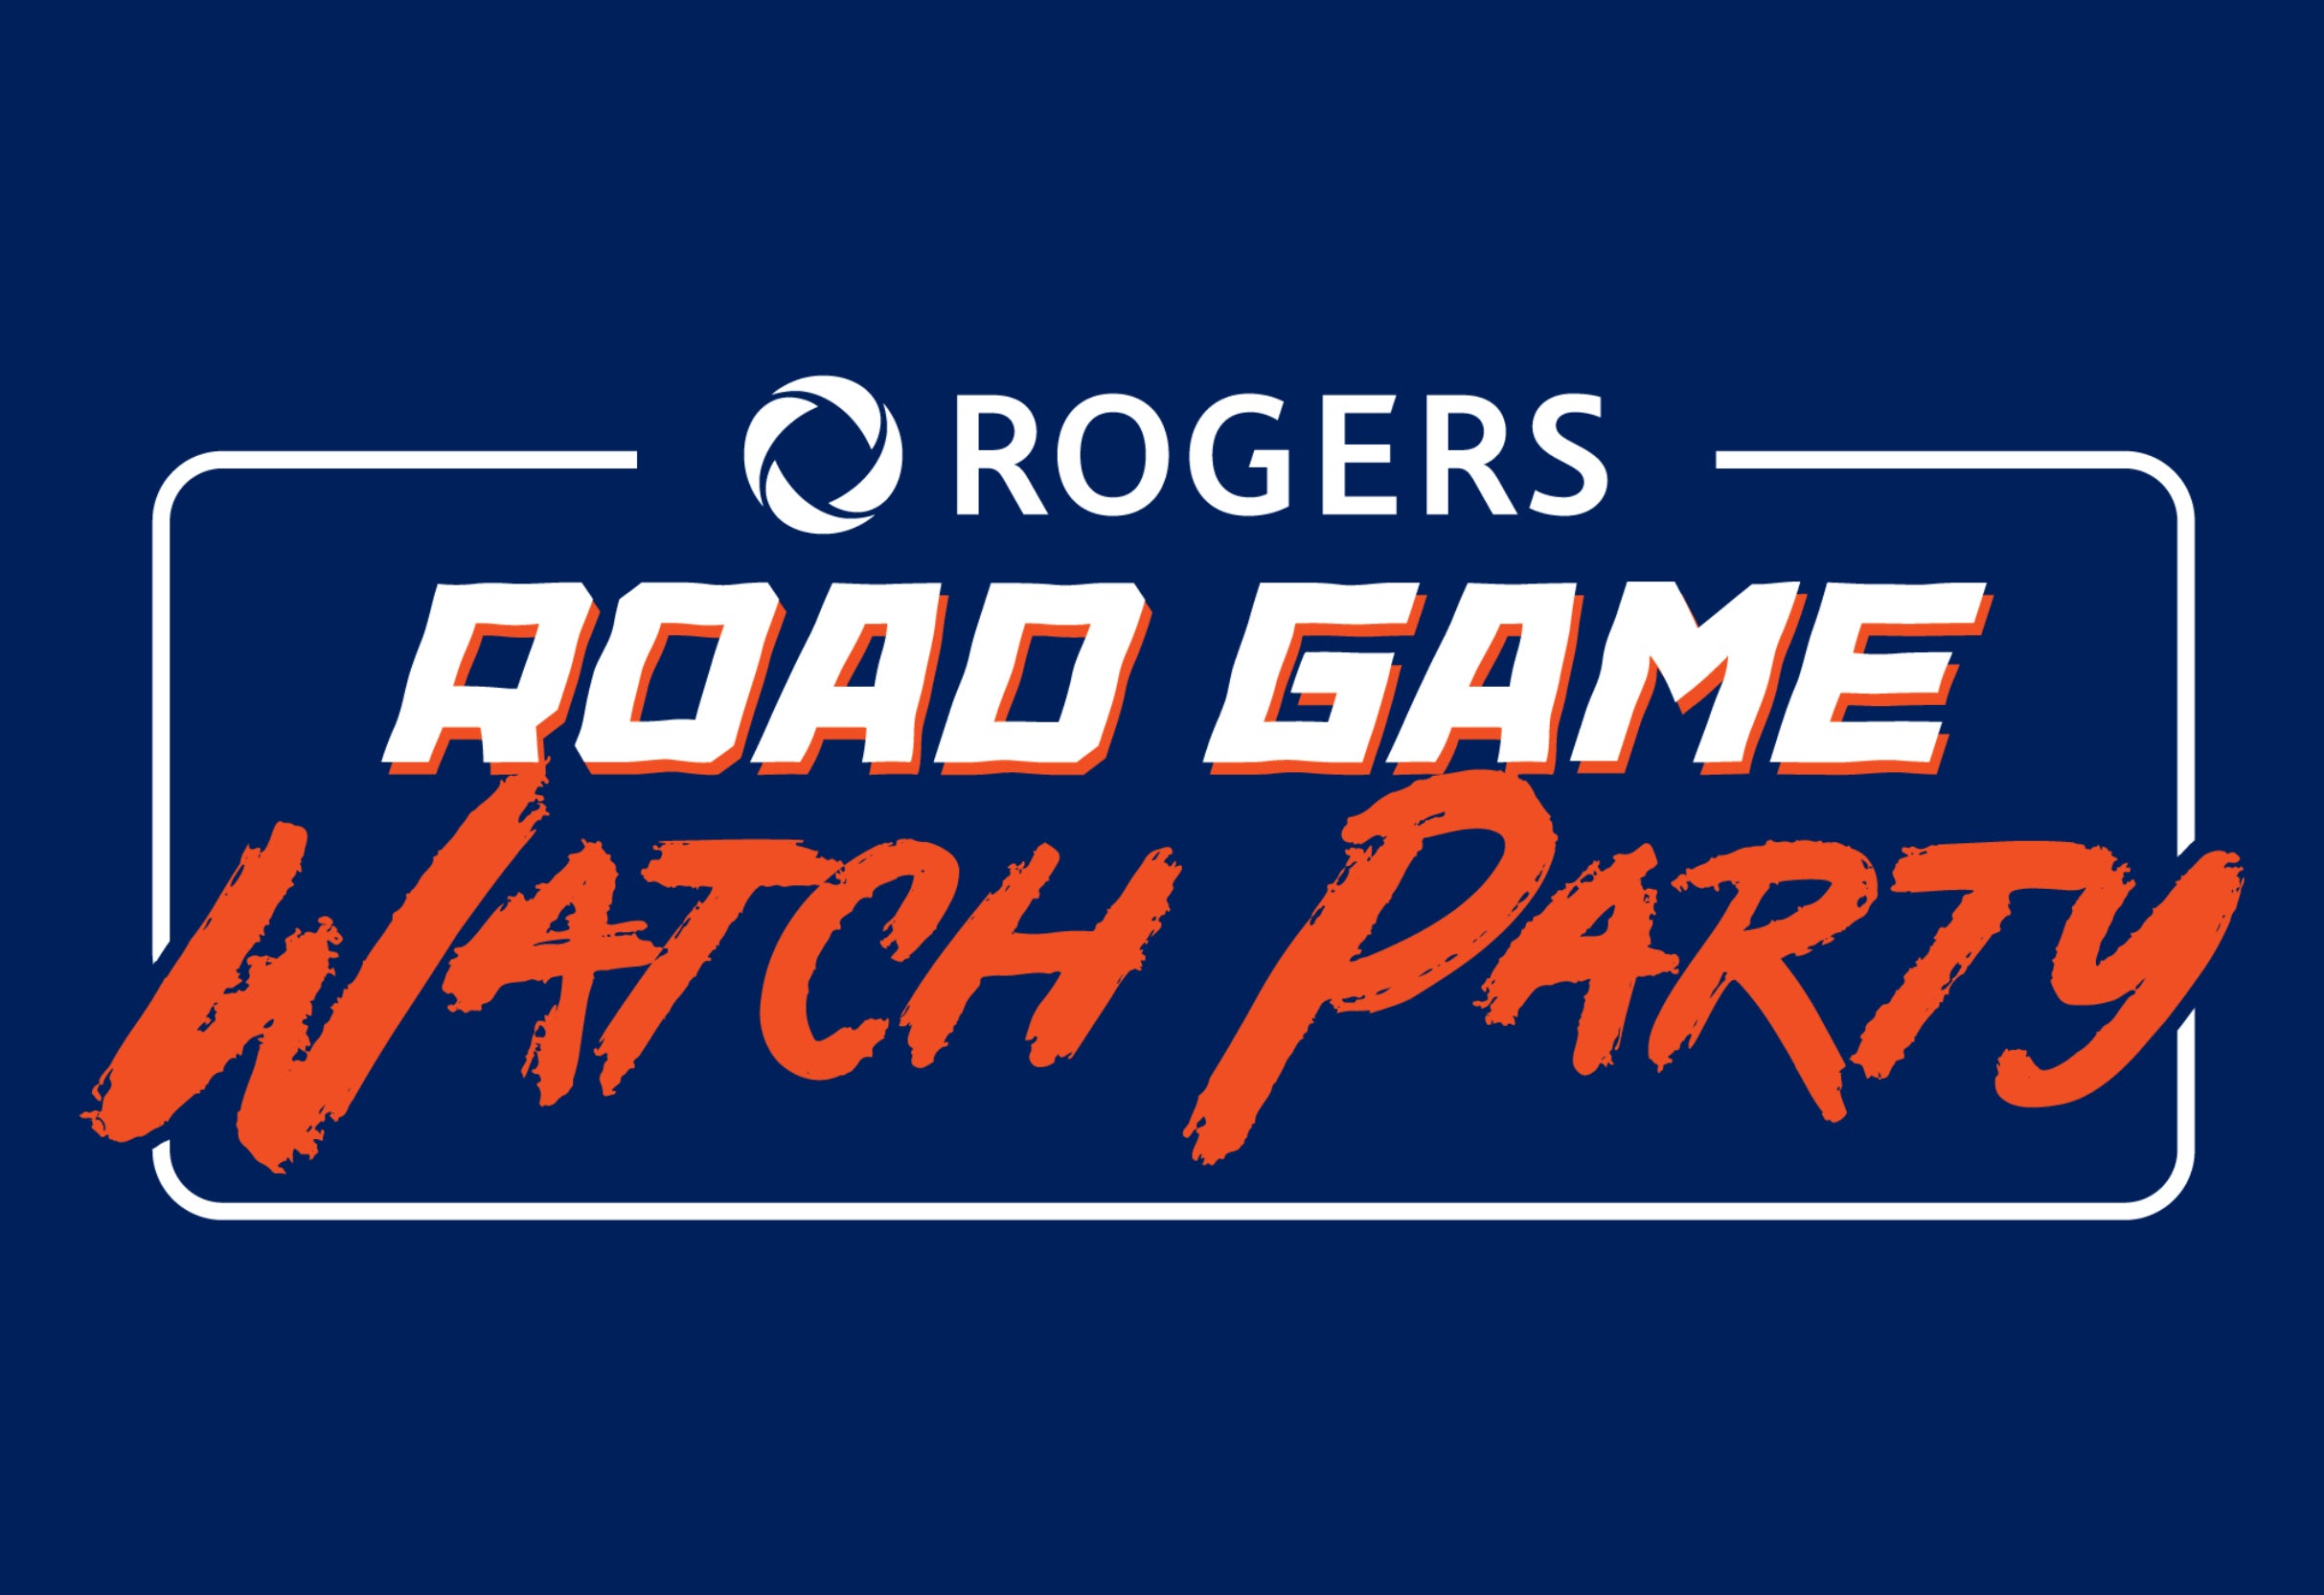 Oilers Road Game Watch Party - Edmonton Oilers v. Canucks presale password for show tickets in Edmonton, AB (Rogers Place)